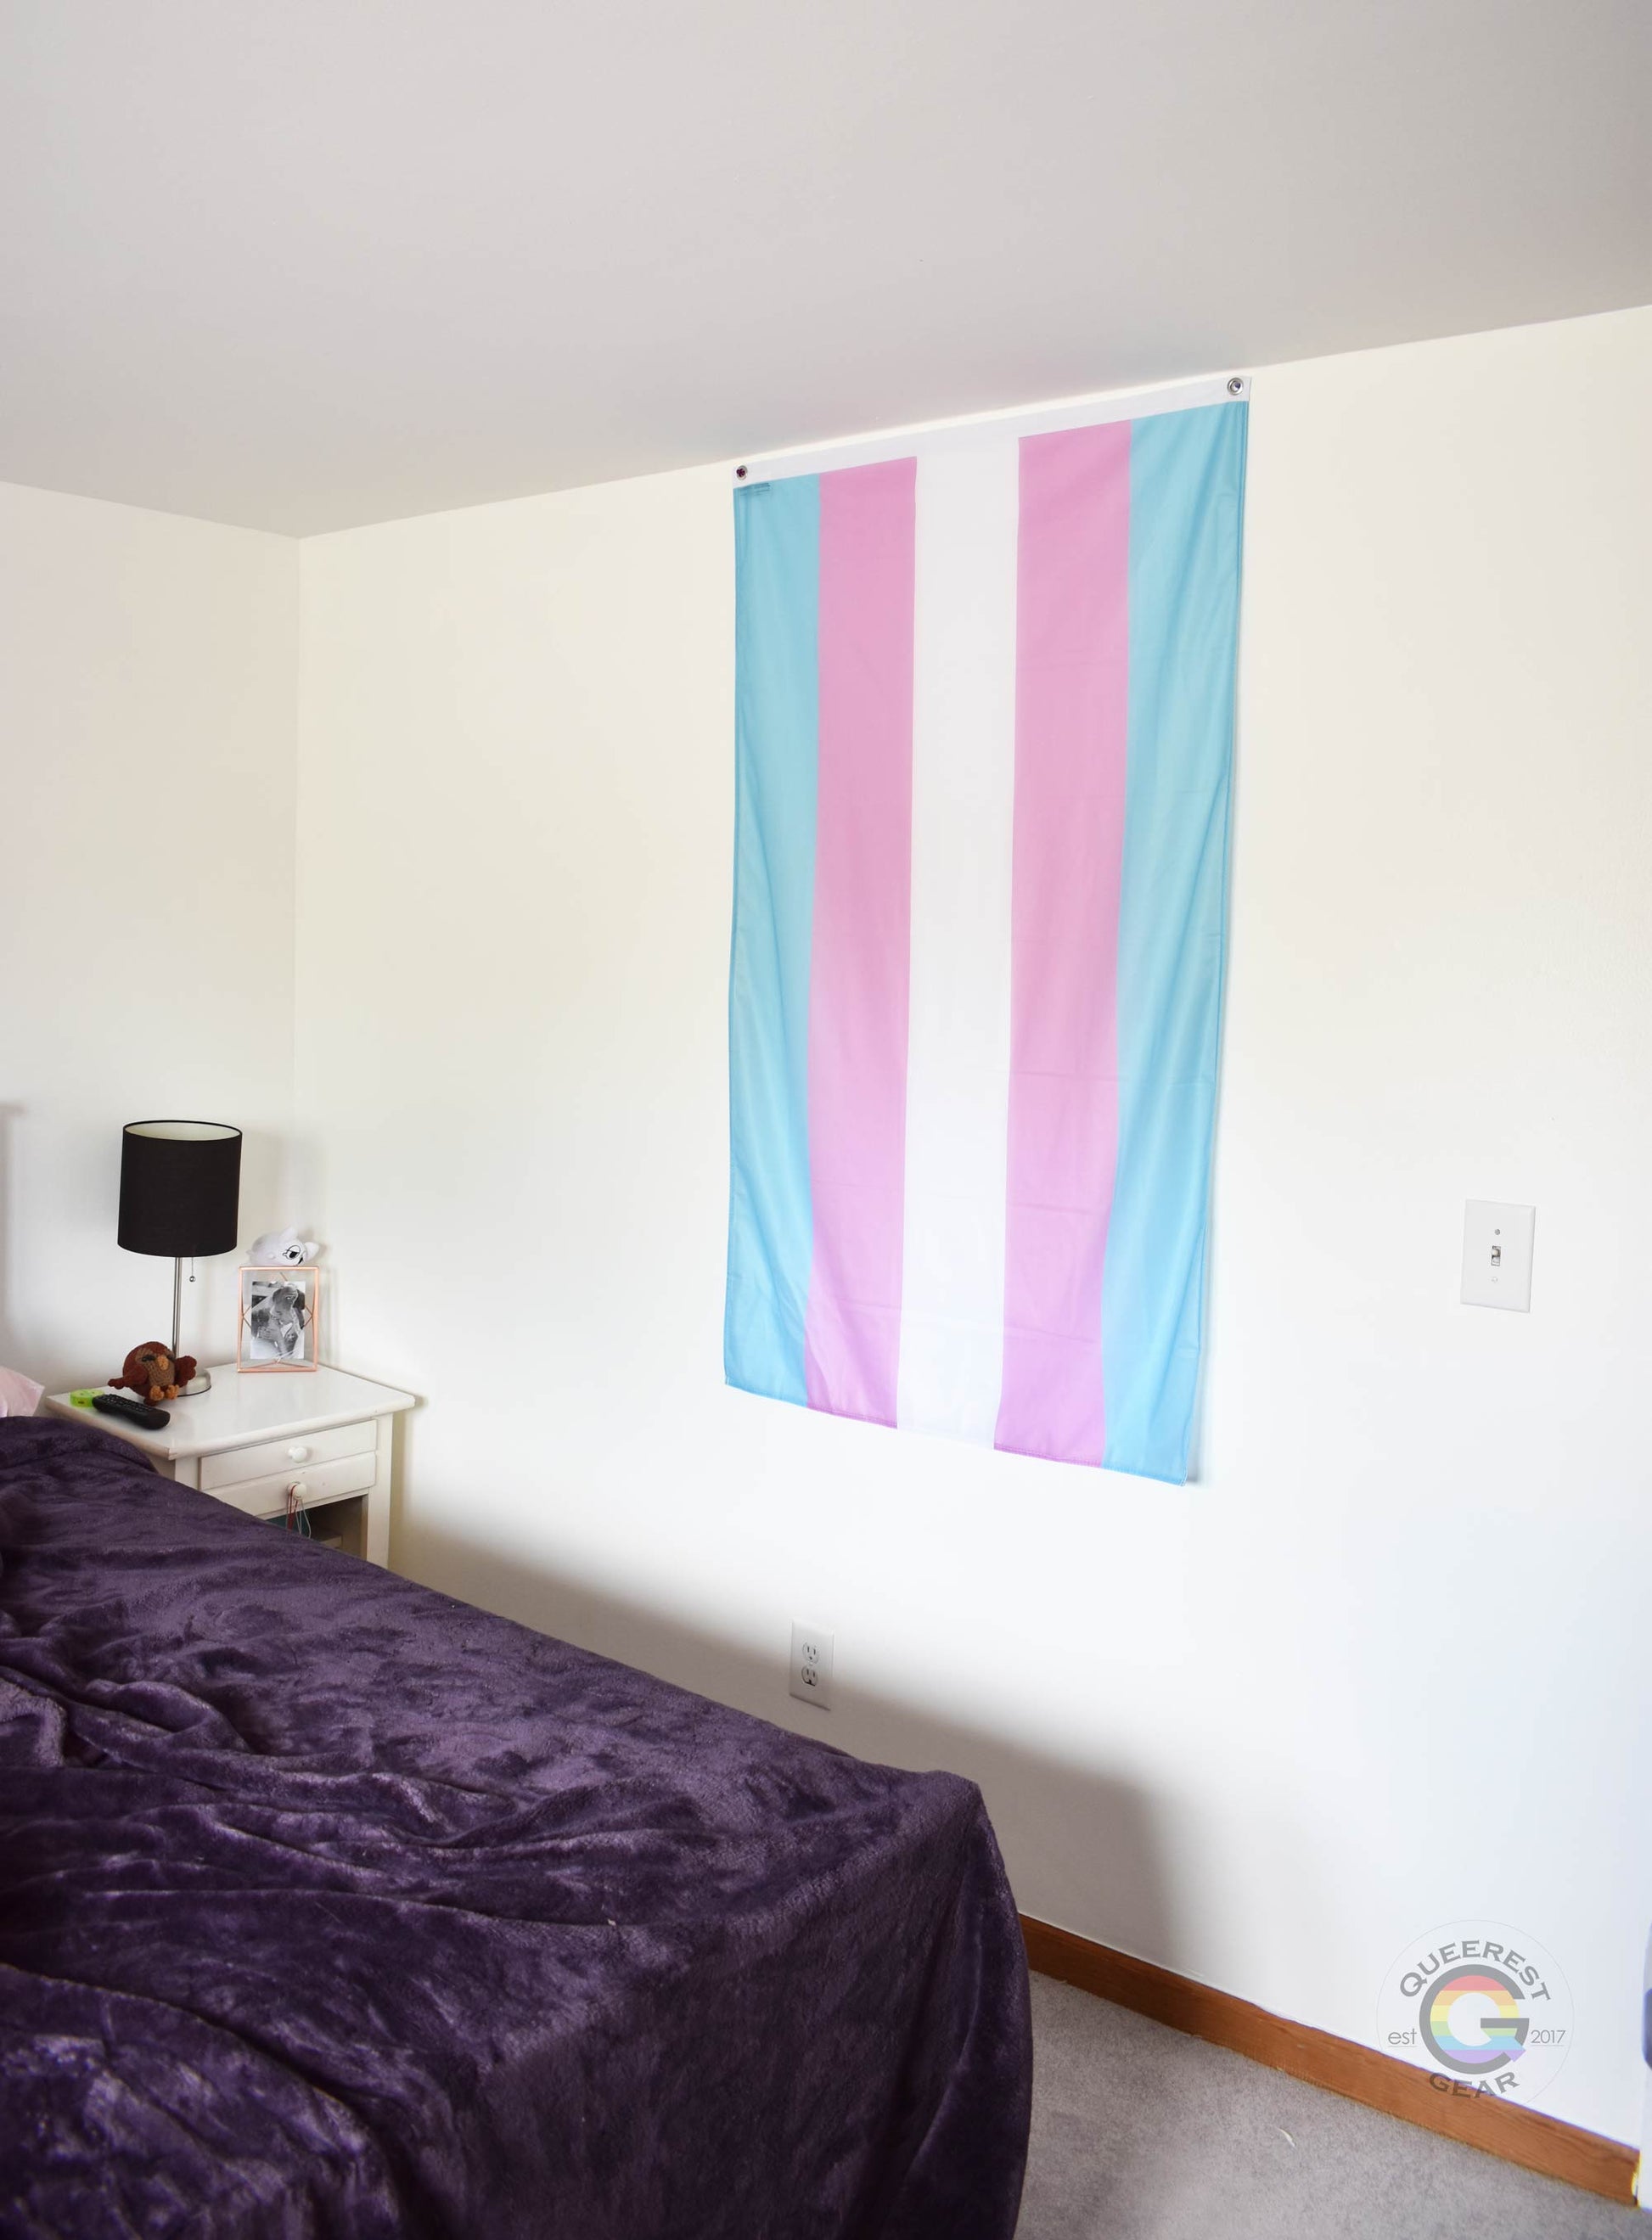 3’x5’ transgender flag hanging vertically on the wall of a bedroom with a nightstand and a bed